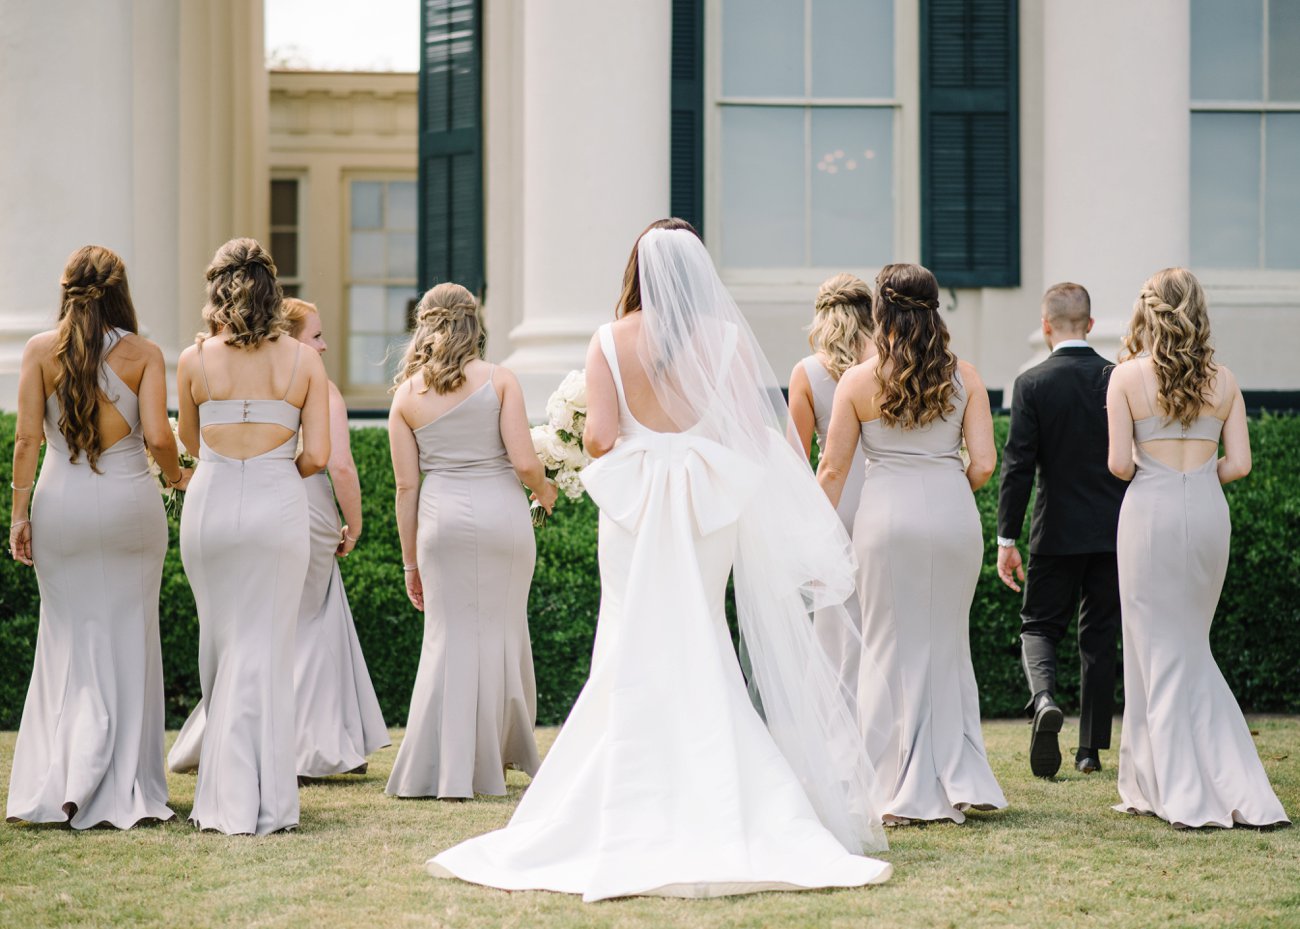 Bride and bridesmaids with large bow on her dress